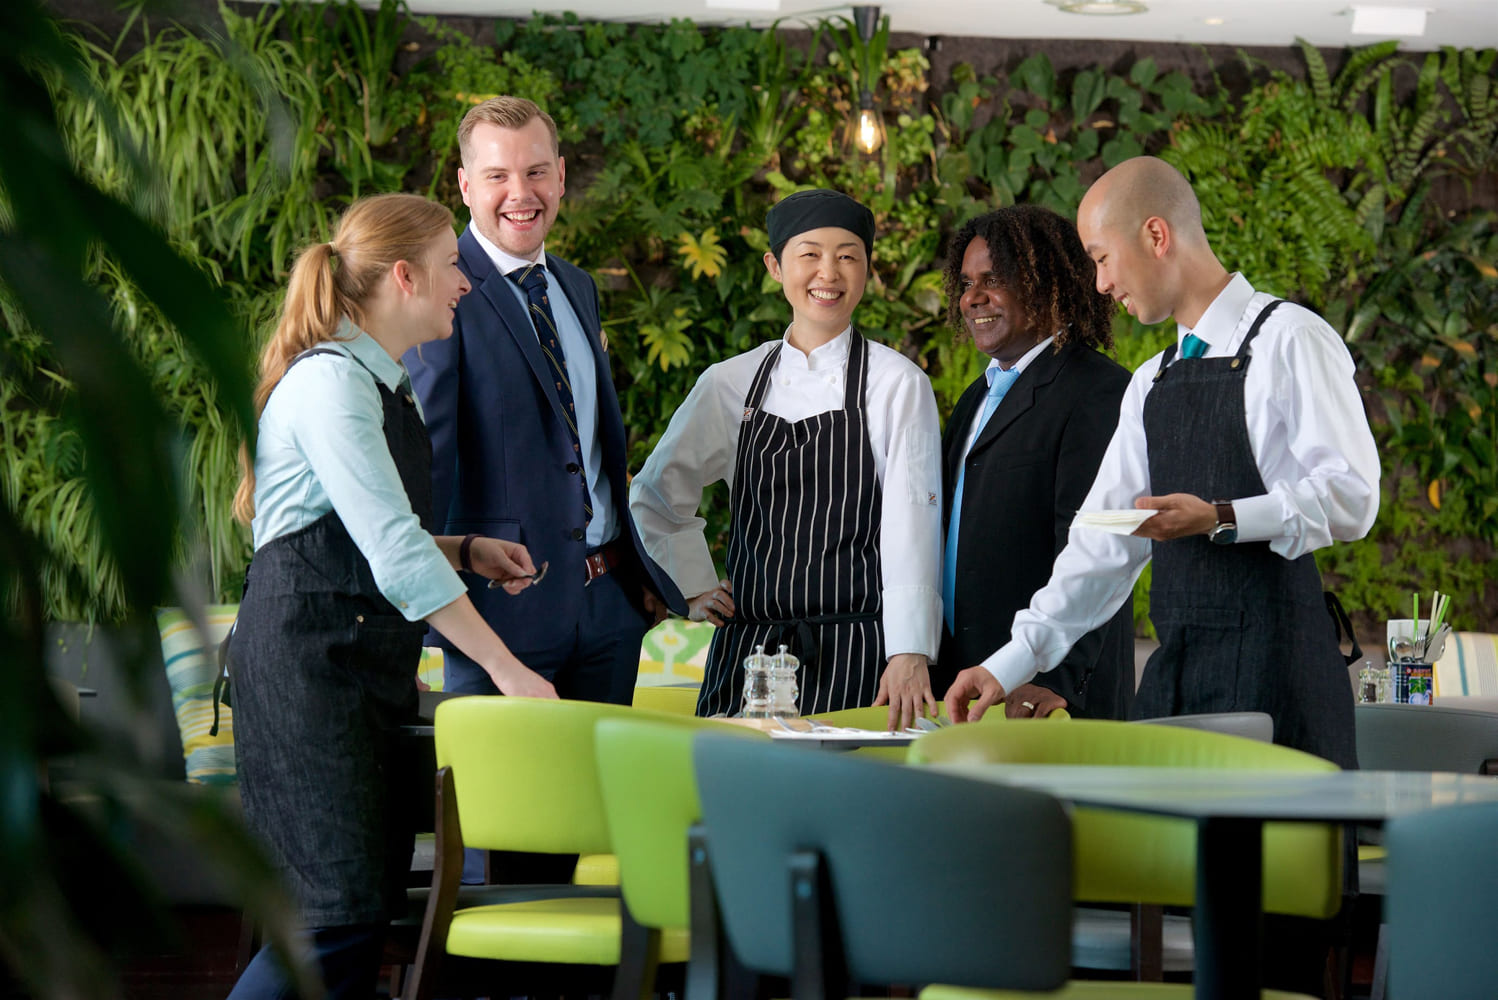 Sustainability and diversity detailed in new AccorHotels report